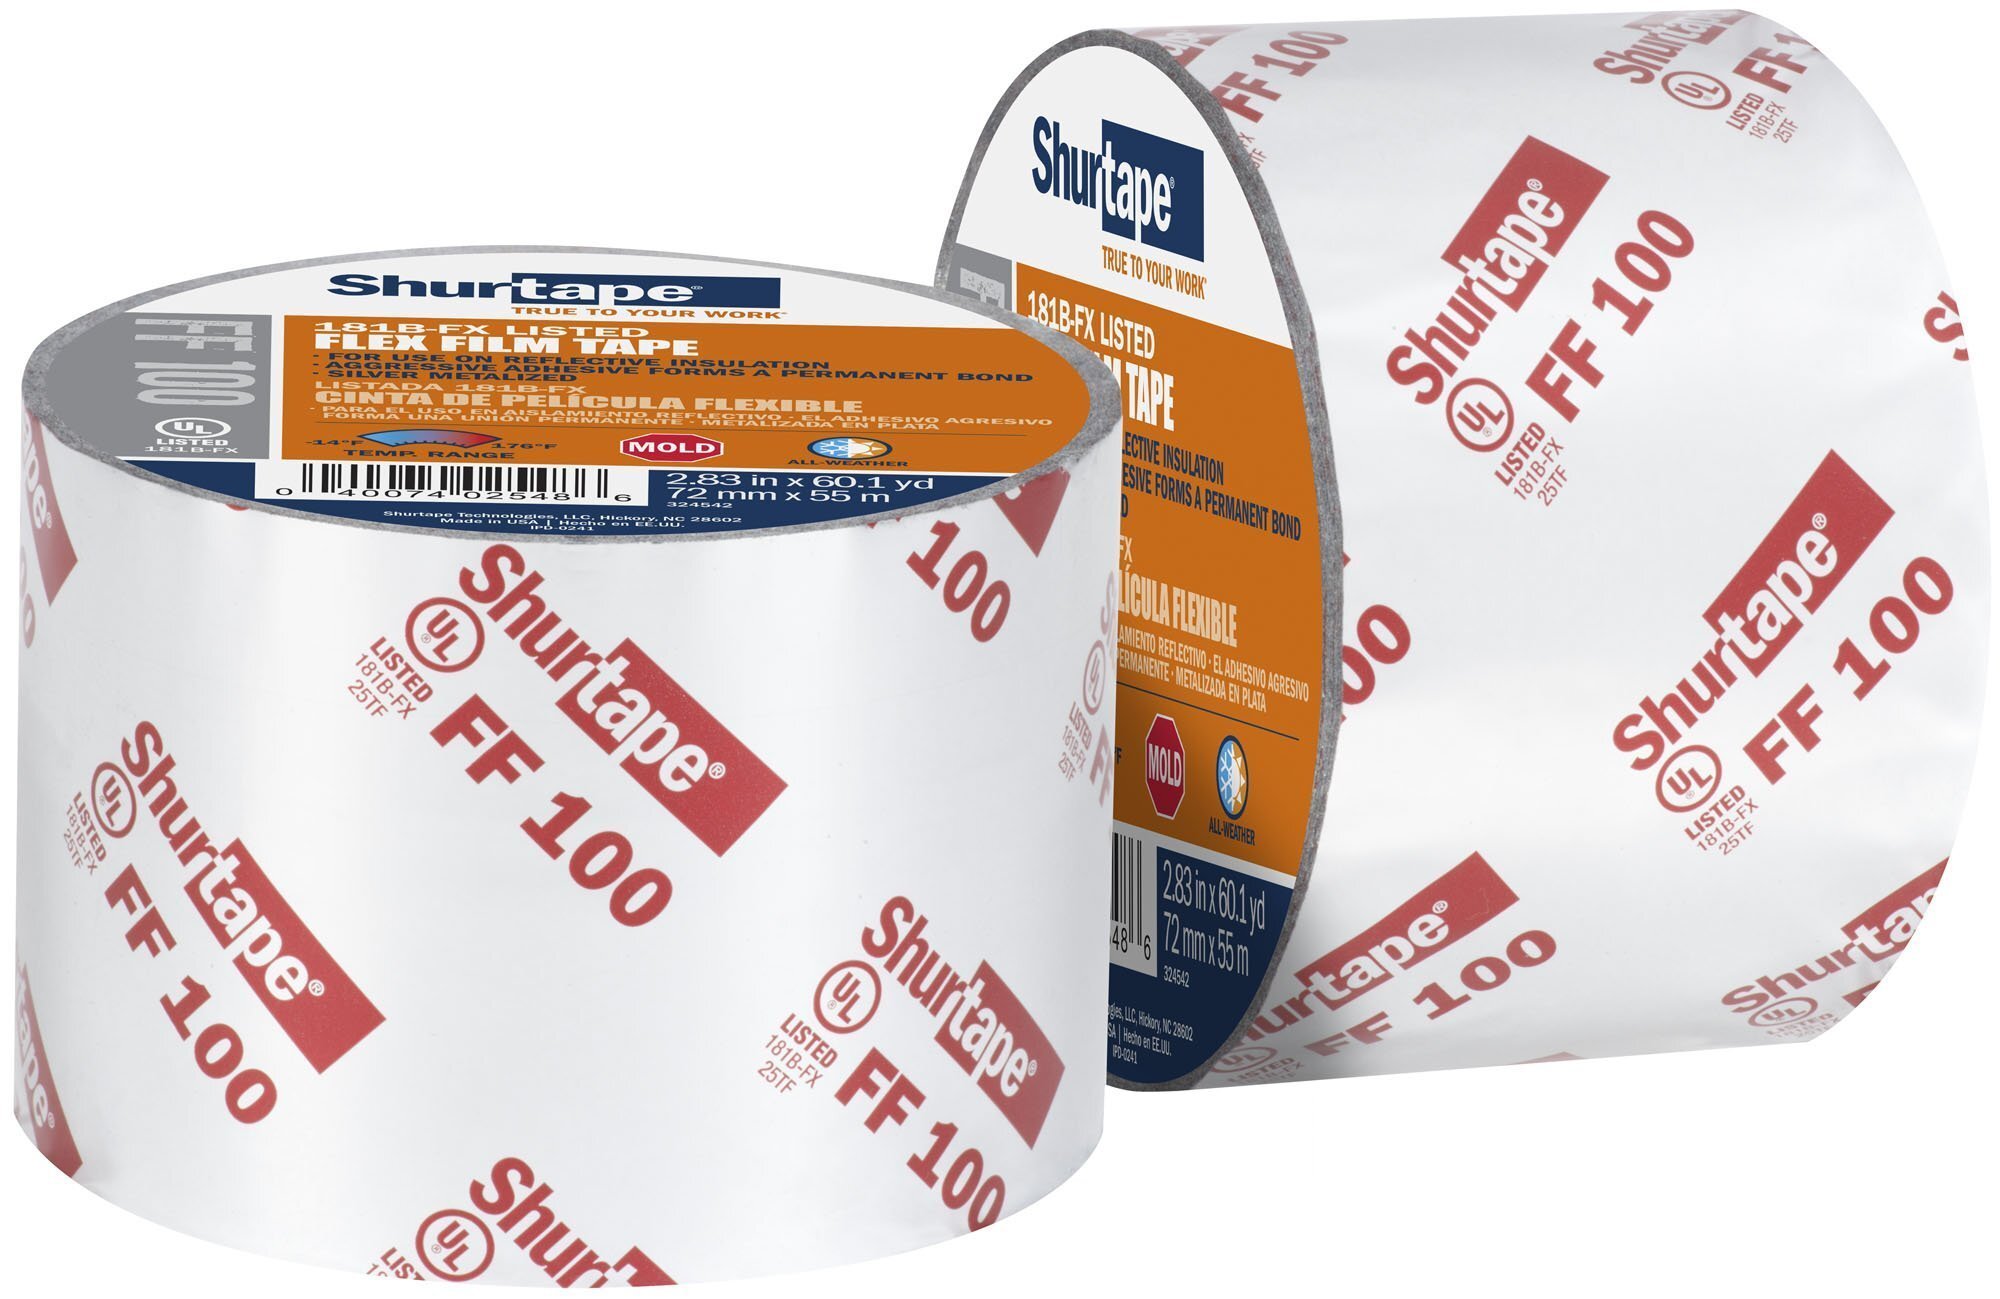 FF 100 All-weather, UL 181B-FX Listed film tape designed specifically for seaming and sealing reflective insulation.